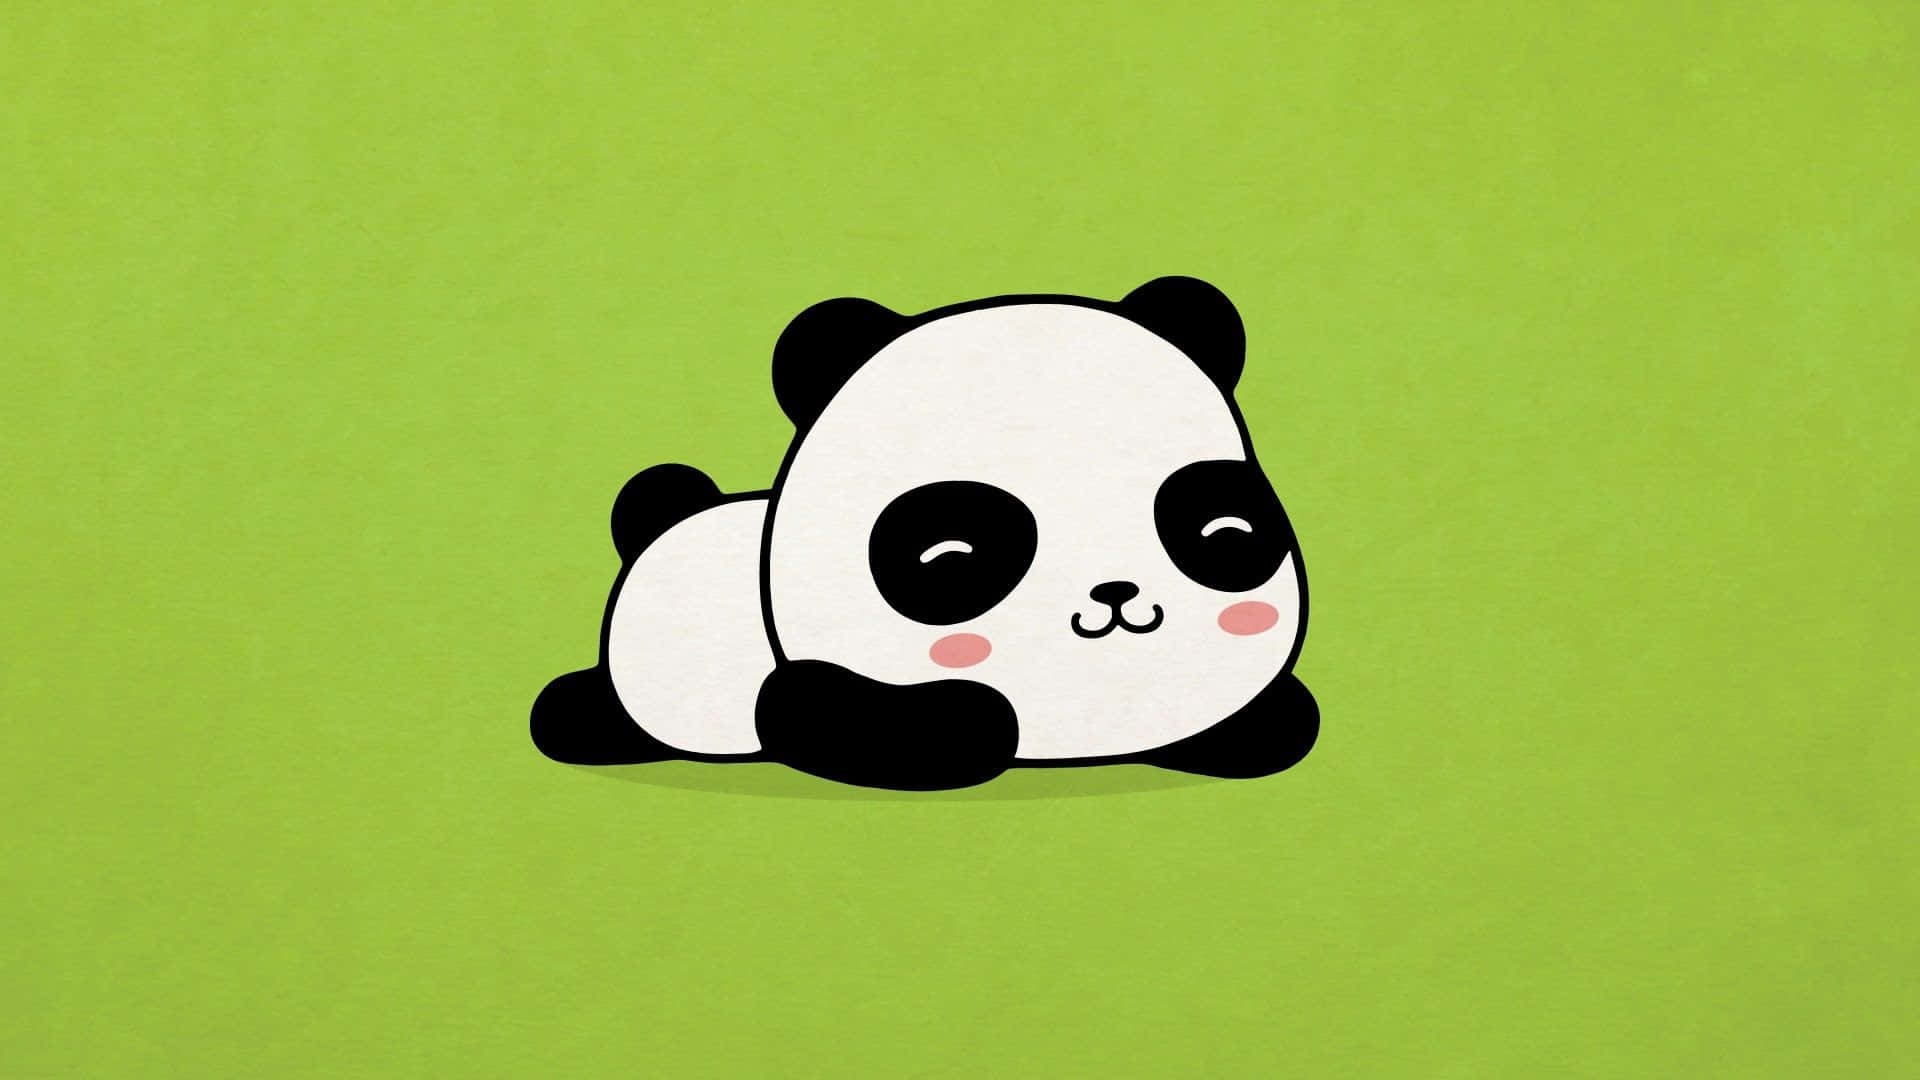 Cute And Sweet Animated Panda Wallpaper Download | MobCup